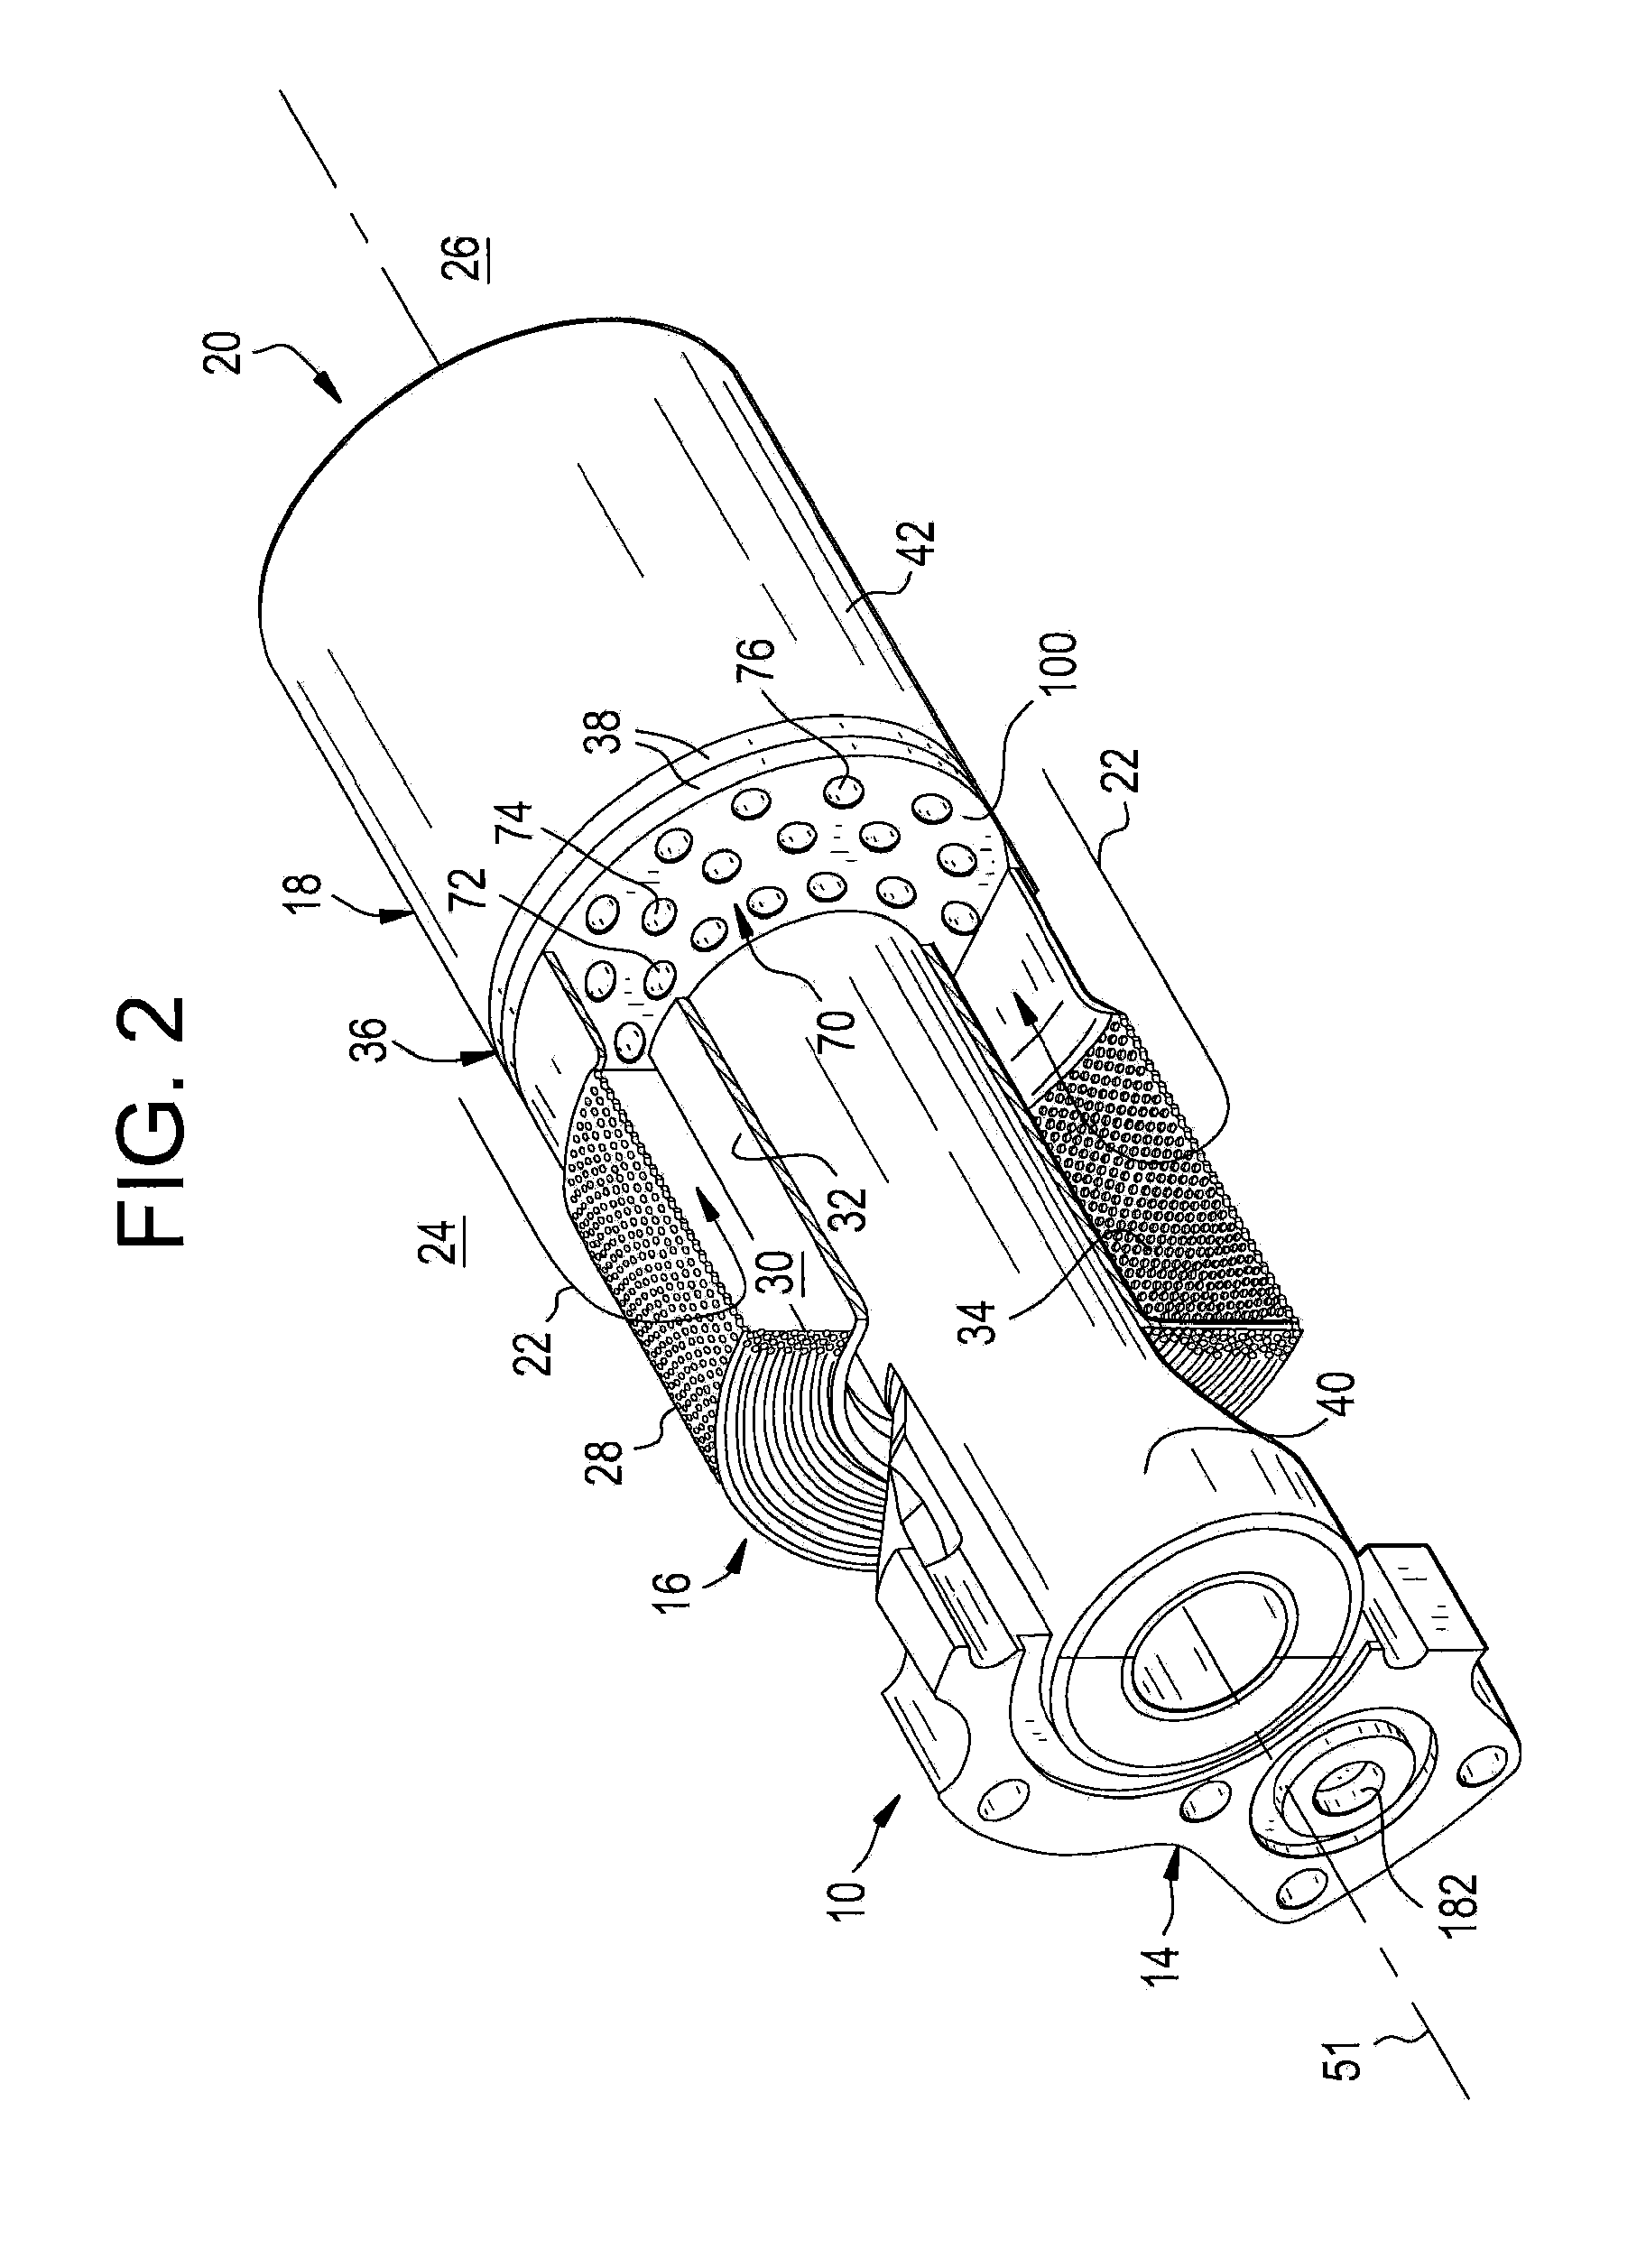 Method and apparatus for delivery of a fuel and combustion air mixture to a gas turbine engine using fuel distribution grooves in a manifold disk with discrete air passages